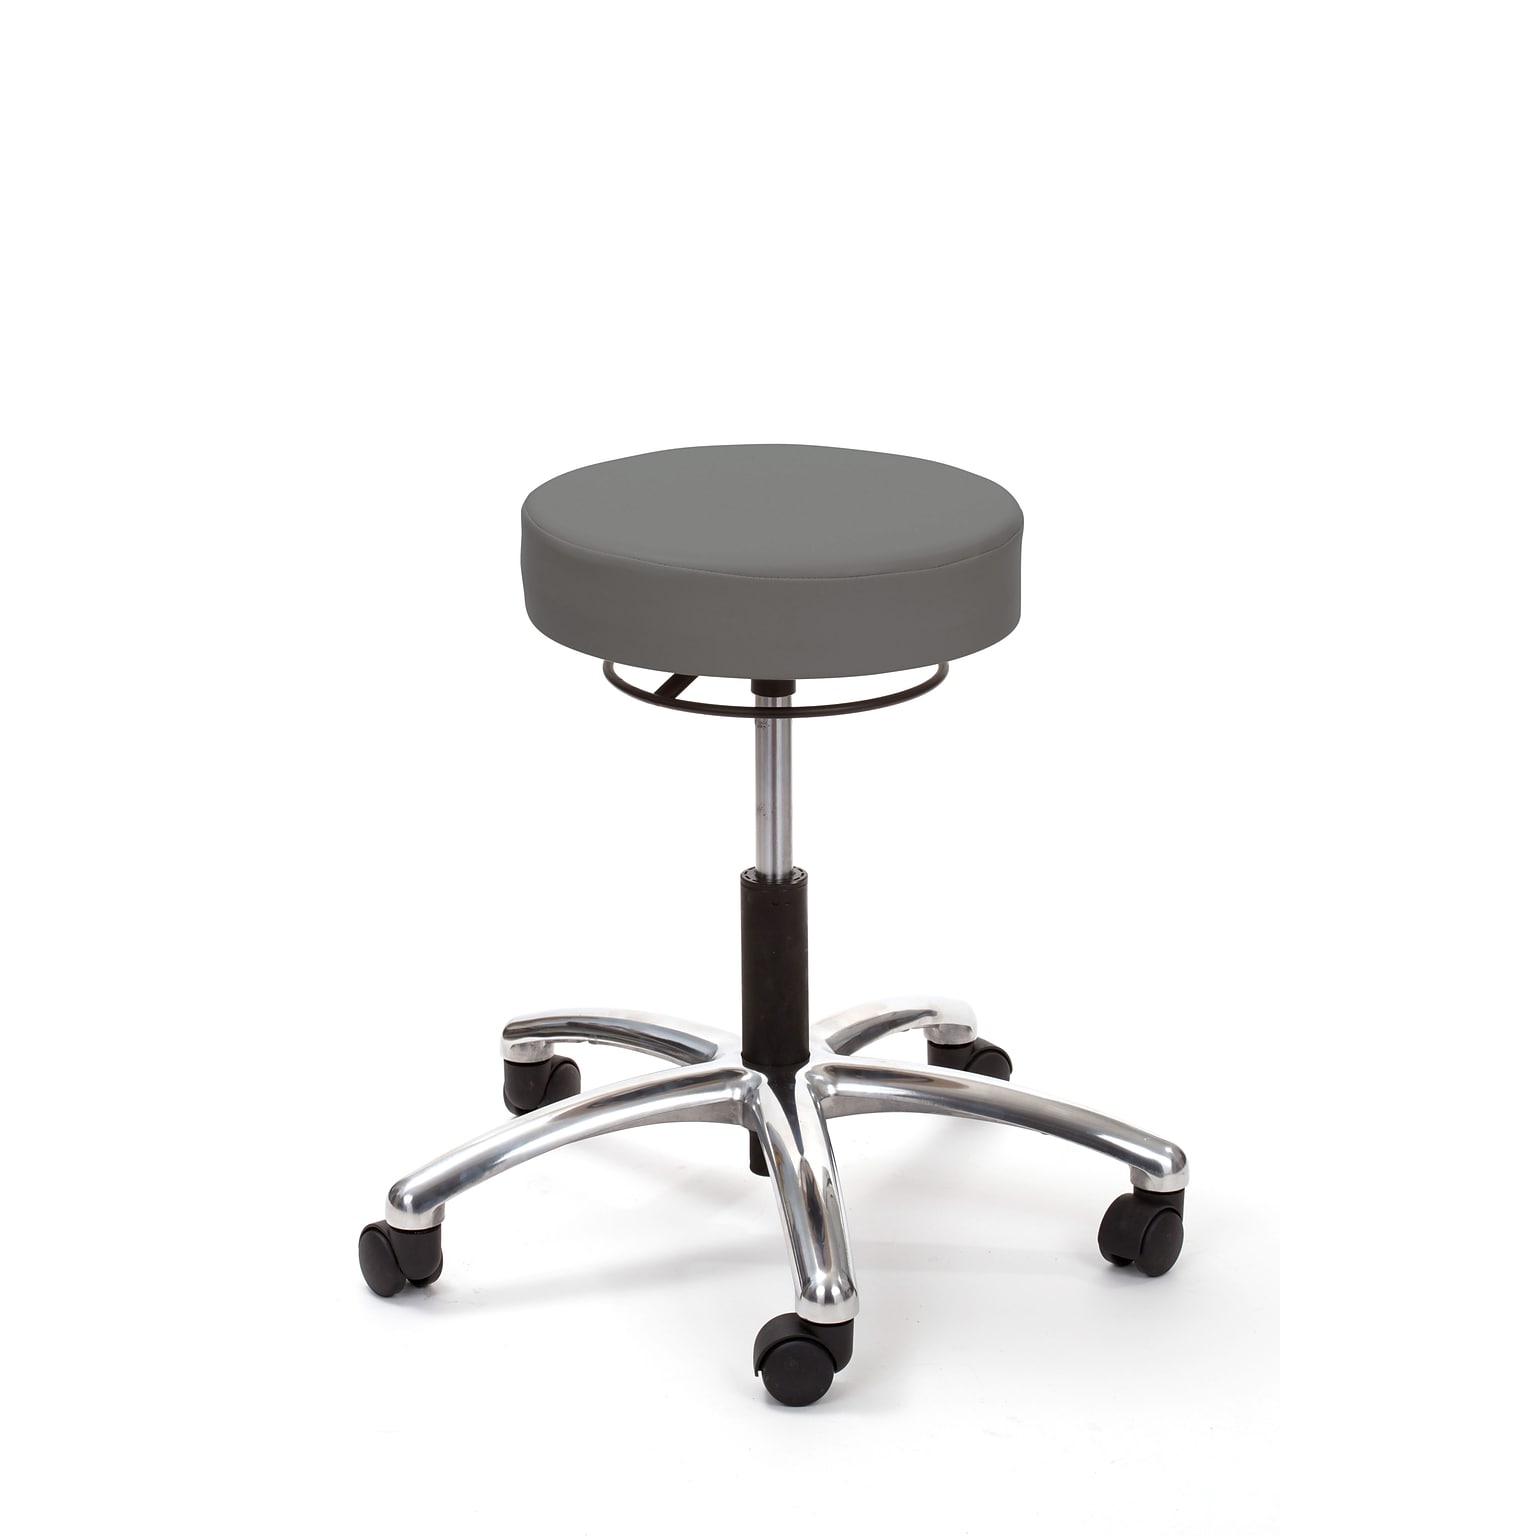 Brandt Airbuoy 17421RR 14 Pneumatic Stool with Ring Release, Charcoal